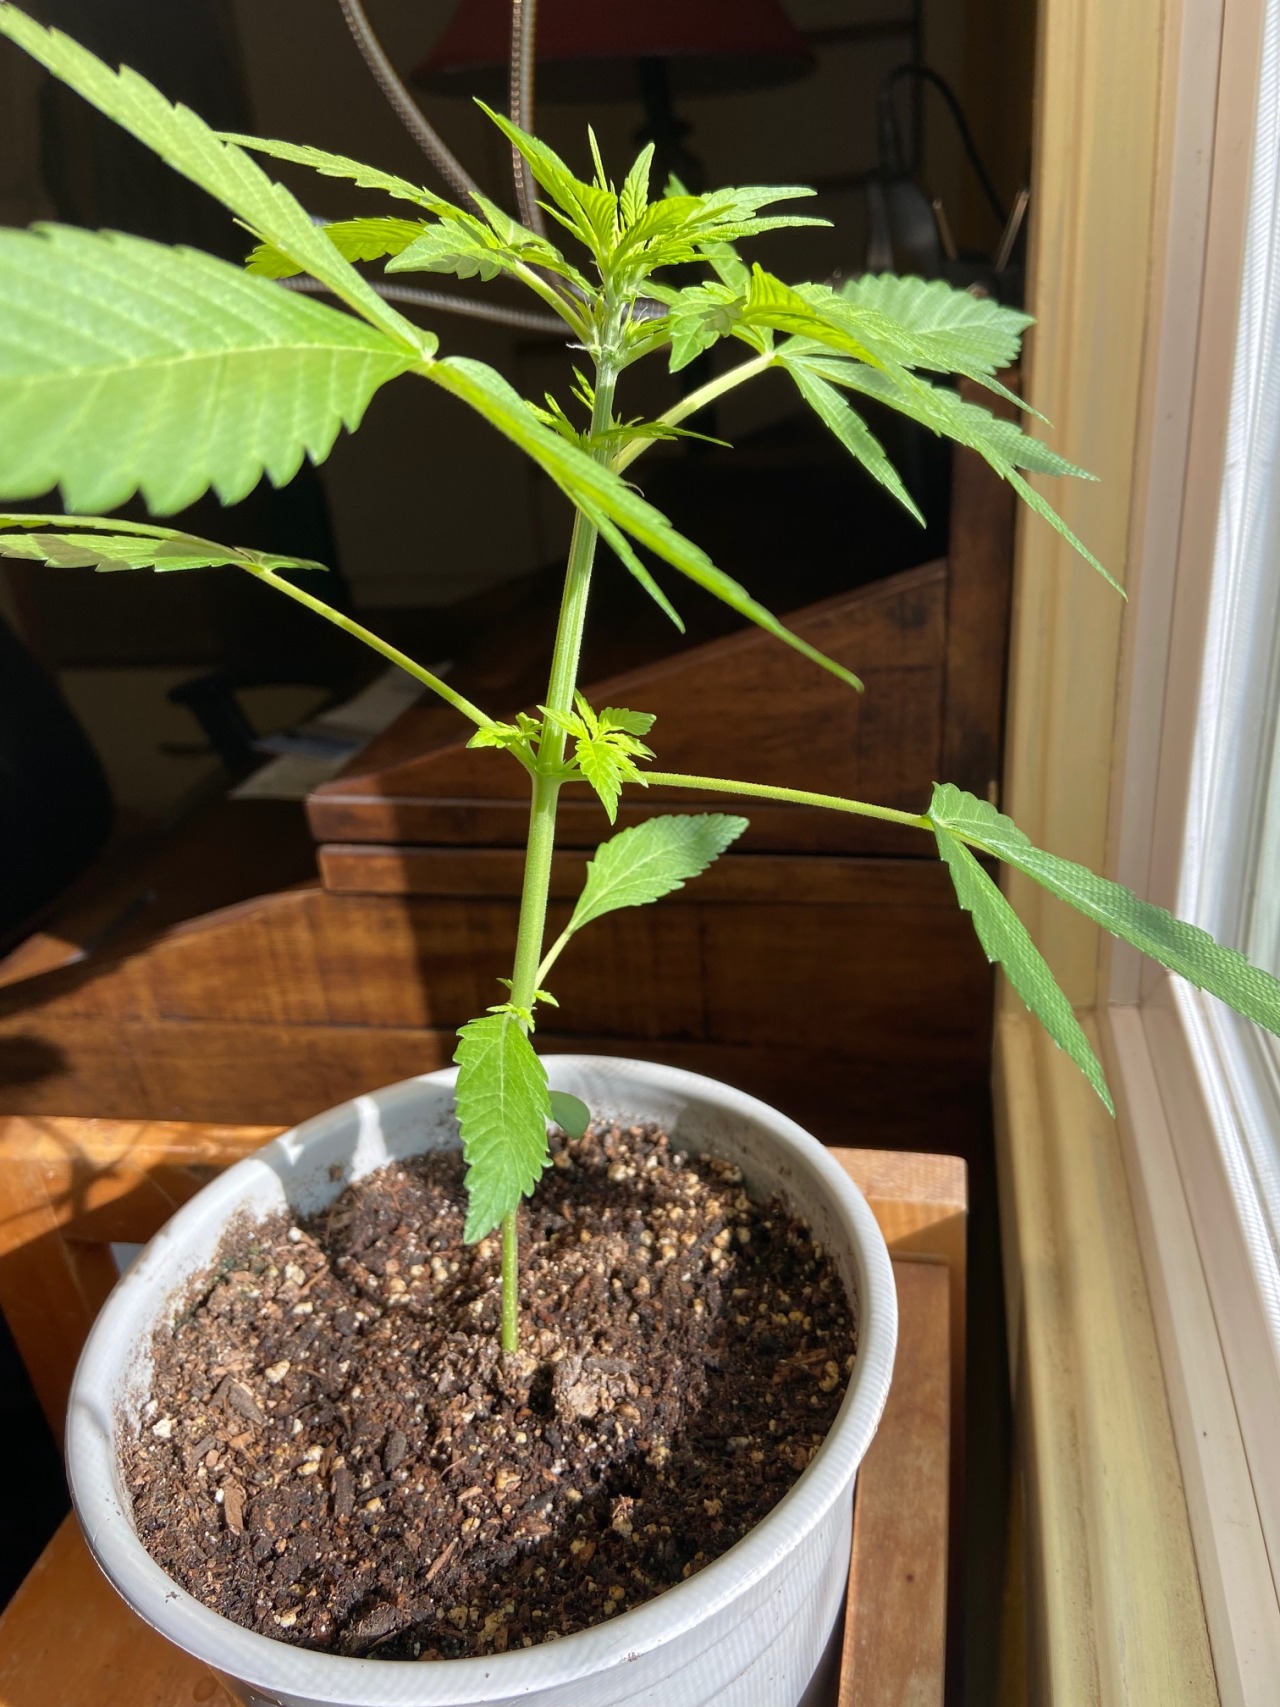 Wow!  A growth spurt!  Hindu Kush Ruderalis.  34 days from seed.  Planted on the shortest day of the year.  Harvest on the 12-12 spring equinox. Grown in natural light in a south window. #hindu kush#cannabis#ruderalis#autoflower